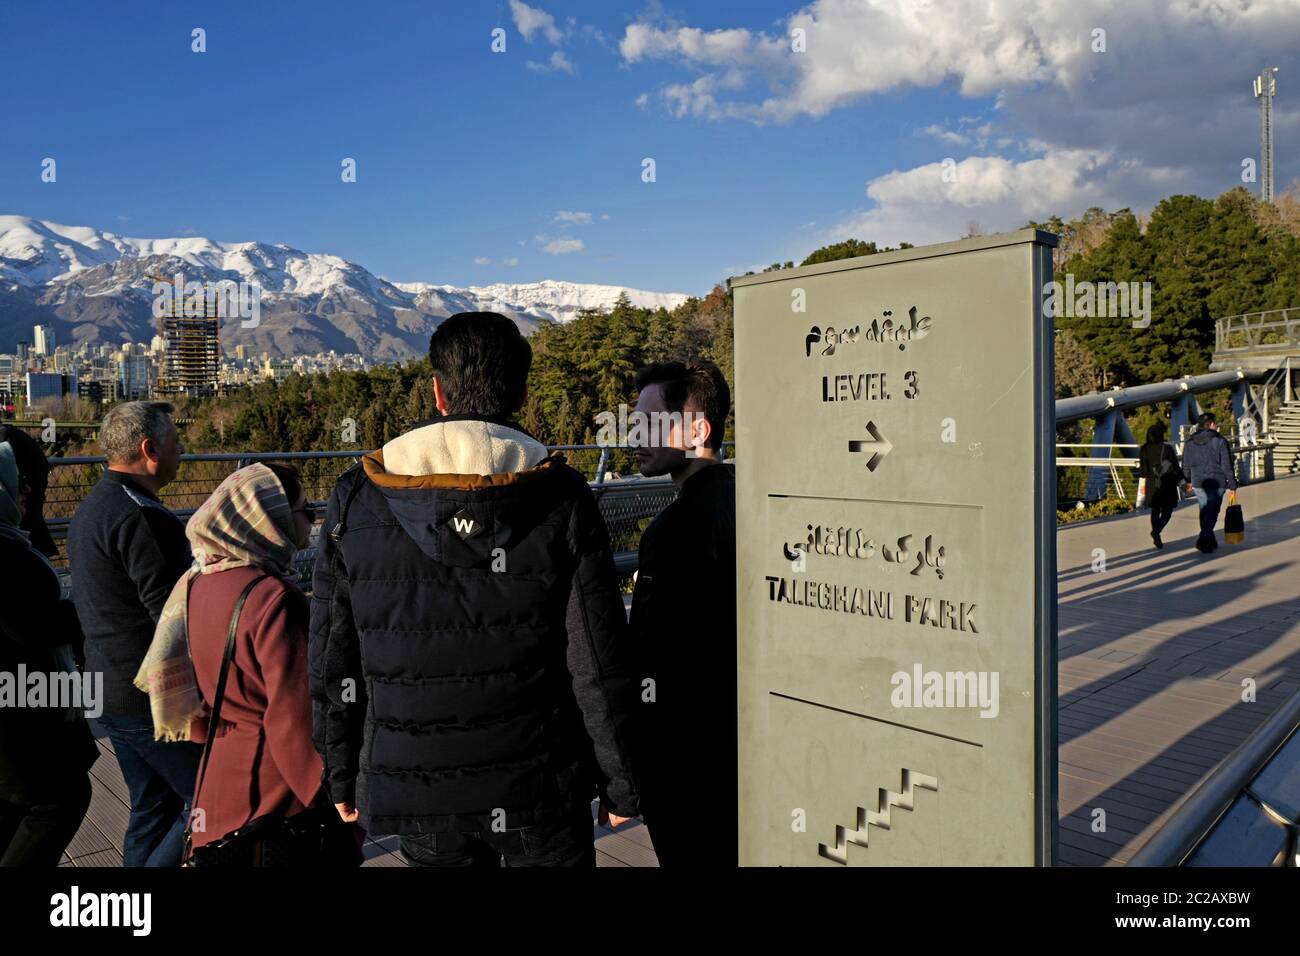 Iranian people crossing the modern Tabiat pedestrian bridge, to Taleghani Park, with the Alborz snow mountains in the background, in Teheran. Stock Photo